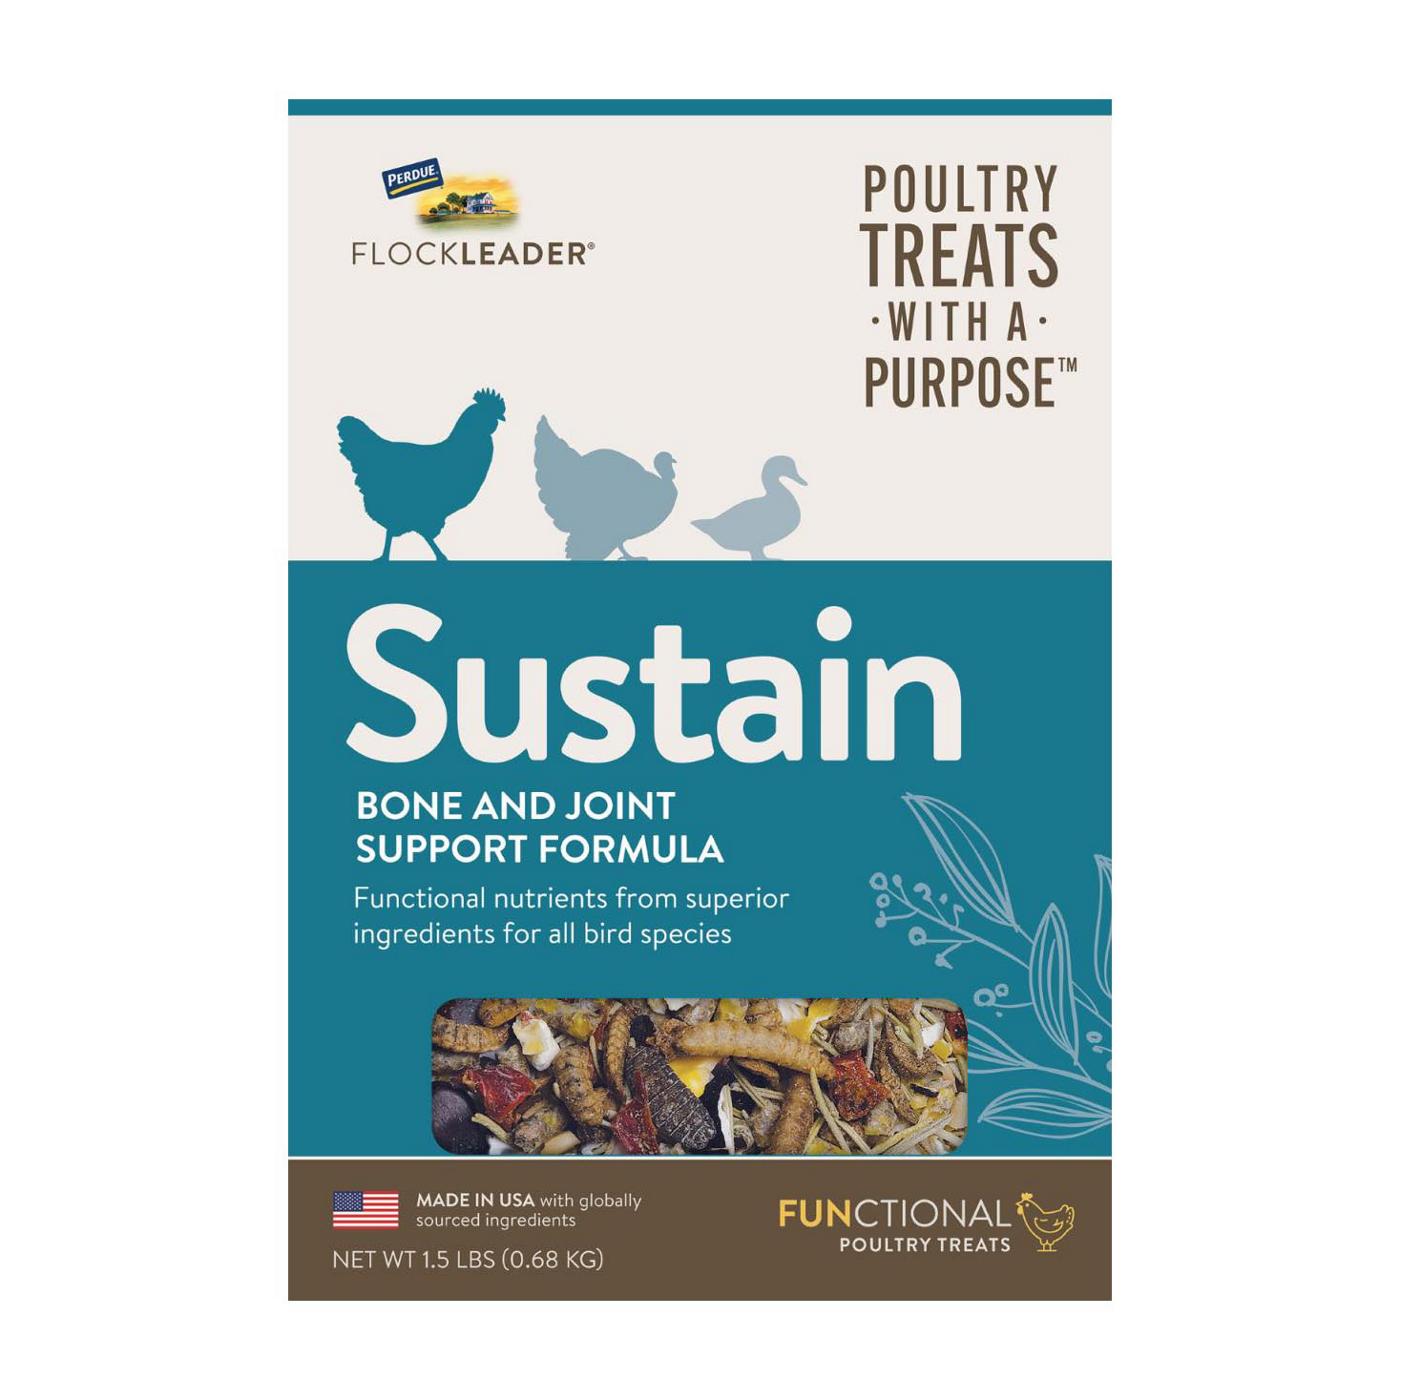 Flockleader Sustain Bone & Joint Support Formula Poultry Treats; image 1 of 4